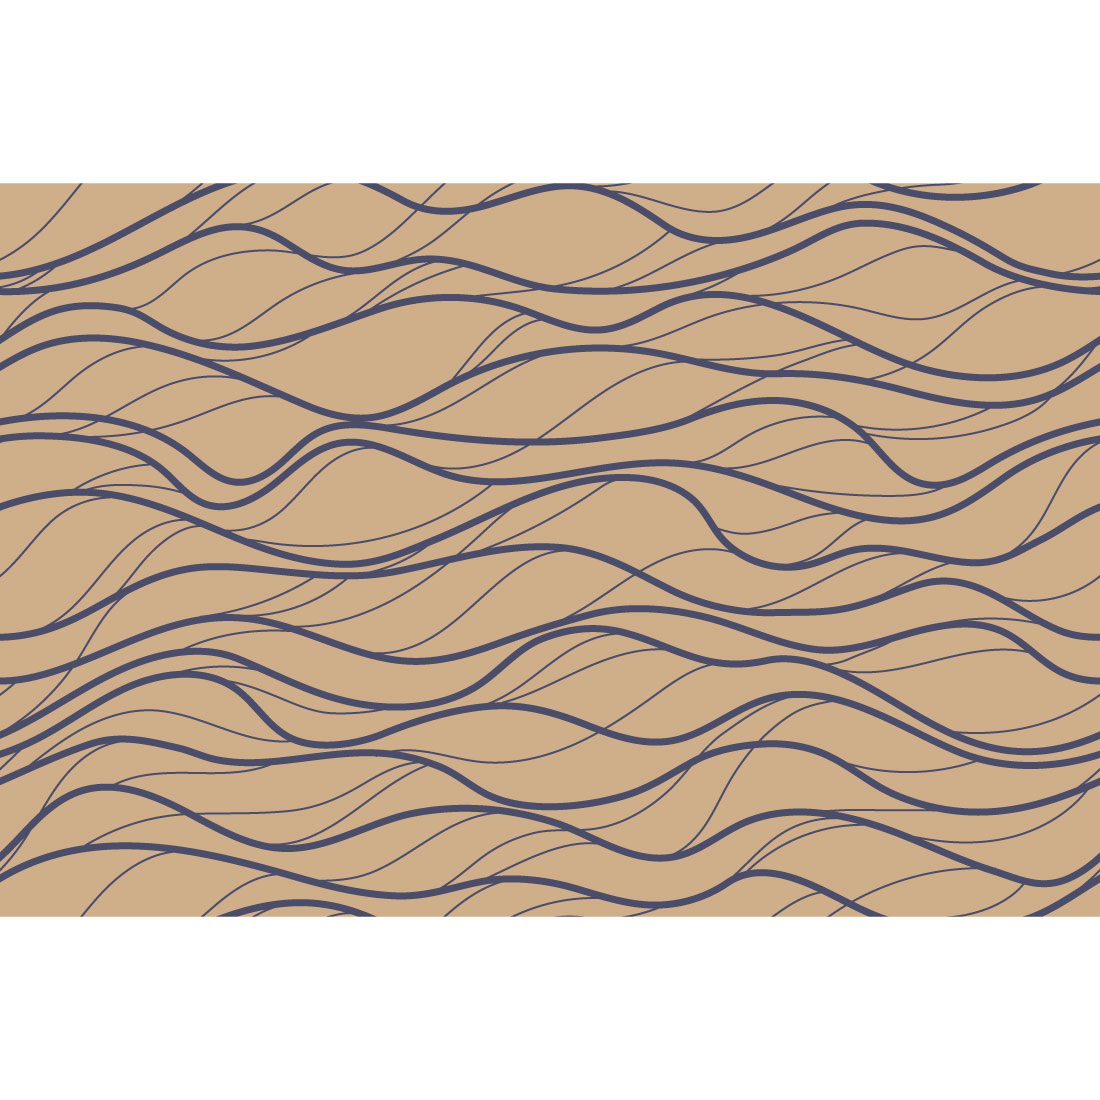 Minimalist Waves Seamless Patterns preview image.